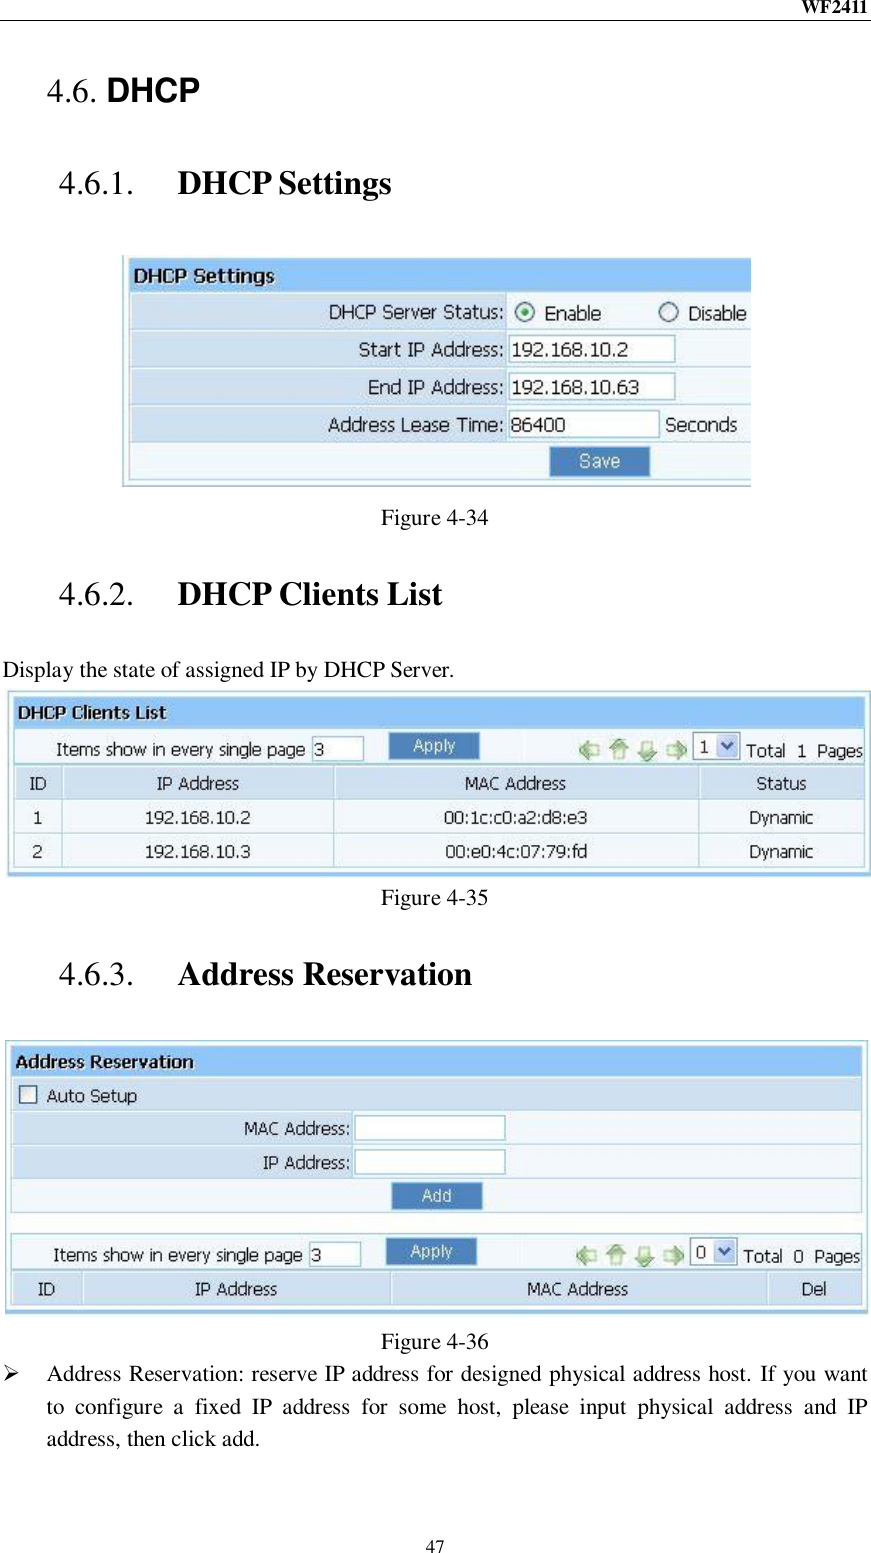 WF2411  47 4.6. DHCP 4.6.1. DHCP Settings  Figure 4-34 4.6.2. DHCP Clients List Display the state of assigned IP by DHCP Server.  Figure 4-35 4.6.3. Address Reservation  Figure 4-36  Address Reservation: reserve IP address for designed physical address host. If you want to  configure  a  fixed  IP  address  for  some  host,  please  input  physical  address  and  IP address, then click add. 